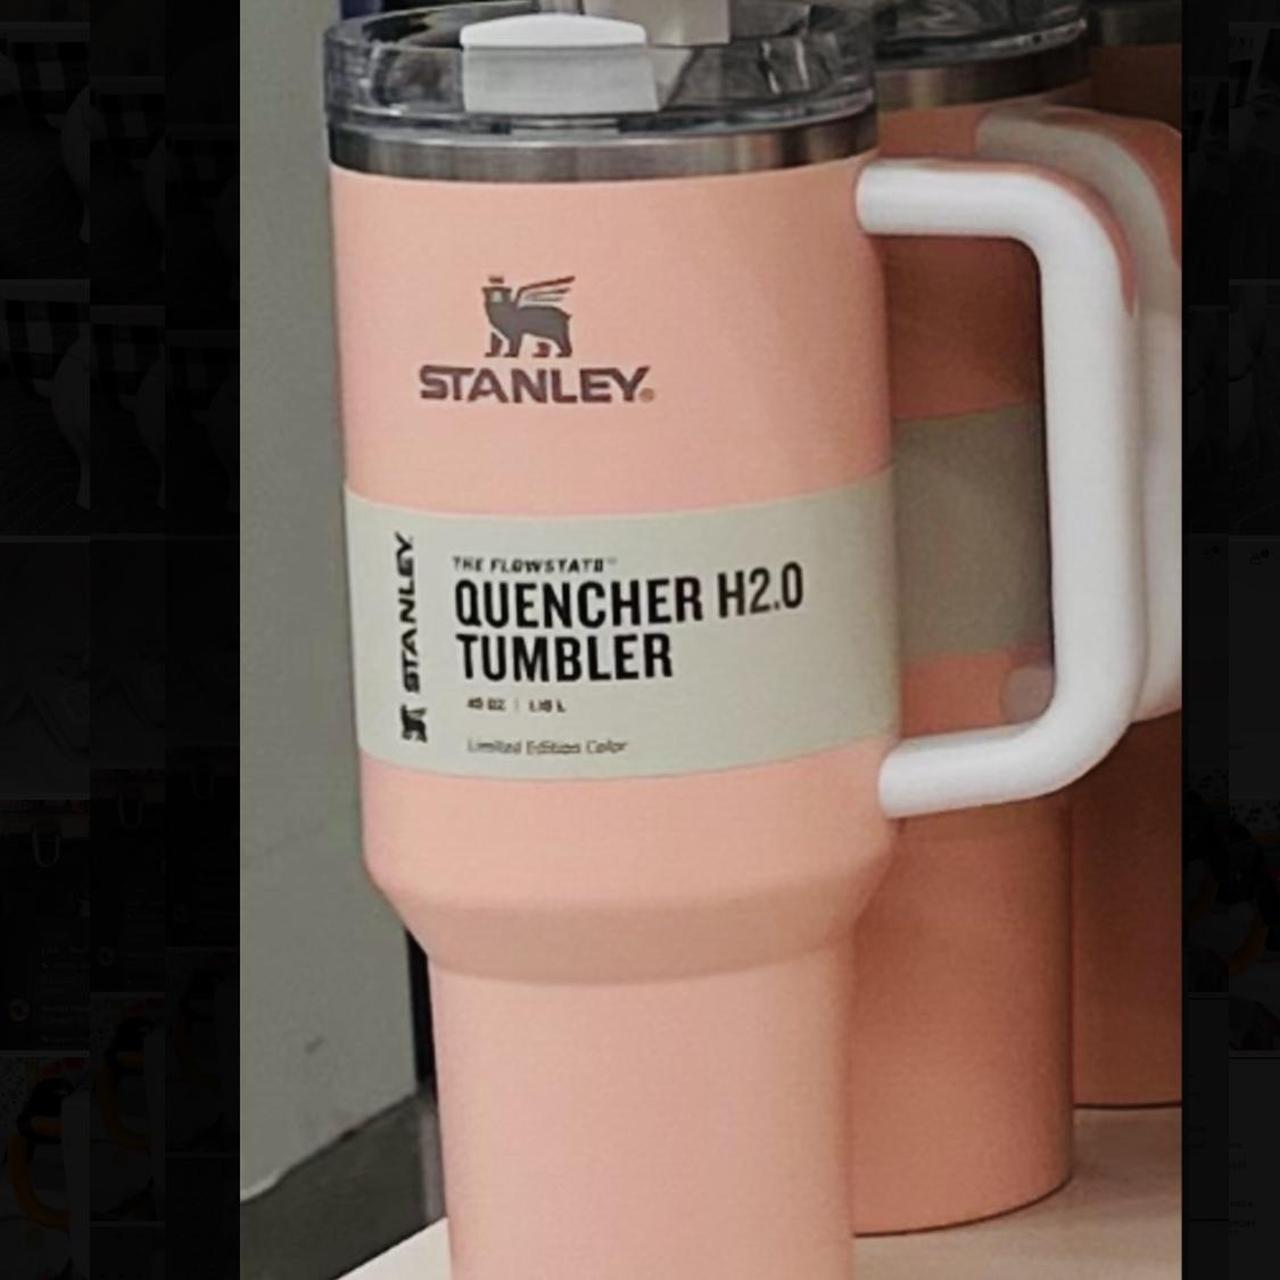 Target Exclusive Stanley 40oz Quencher Peach